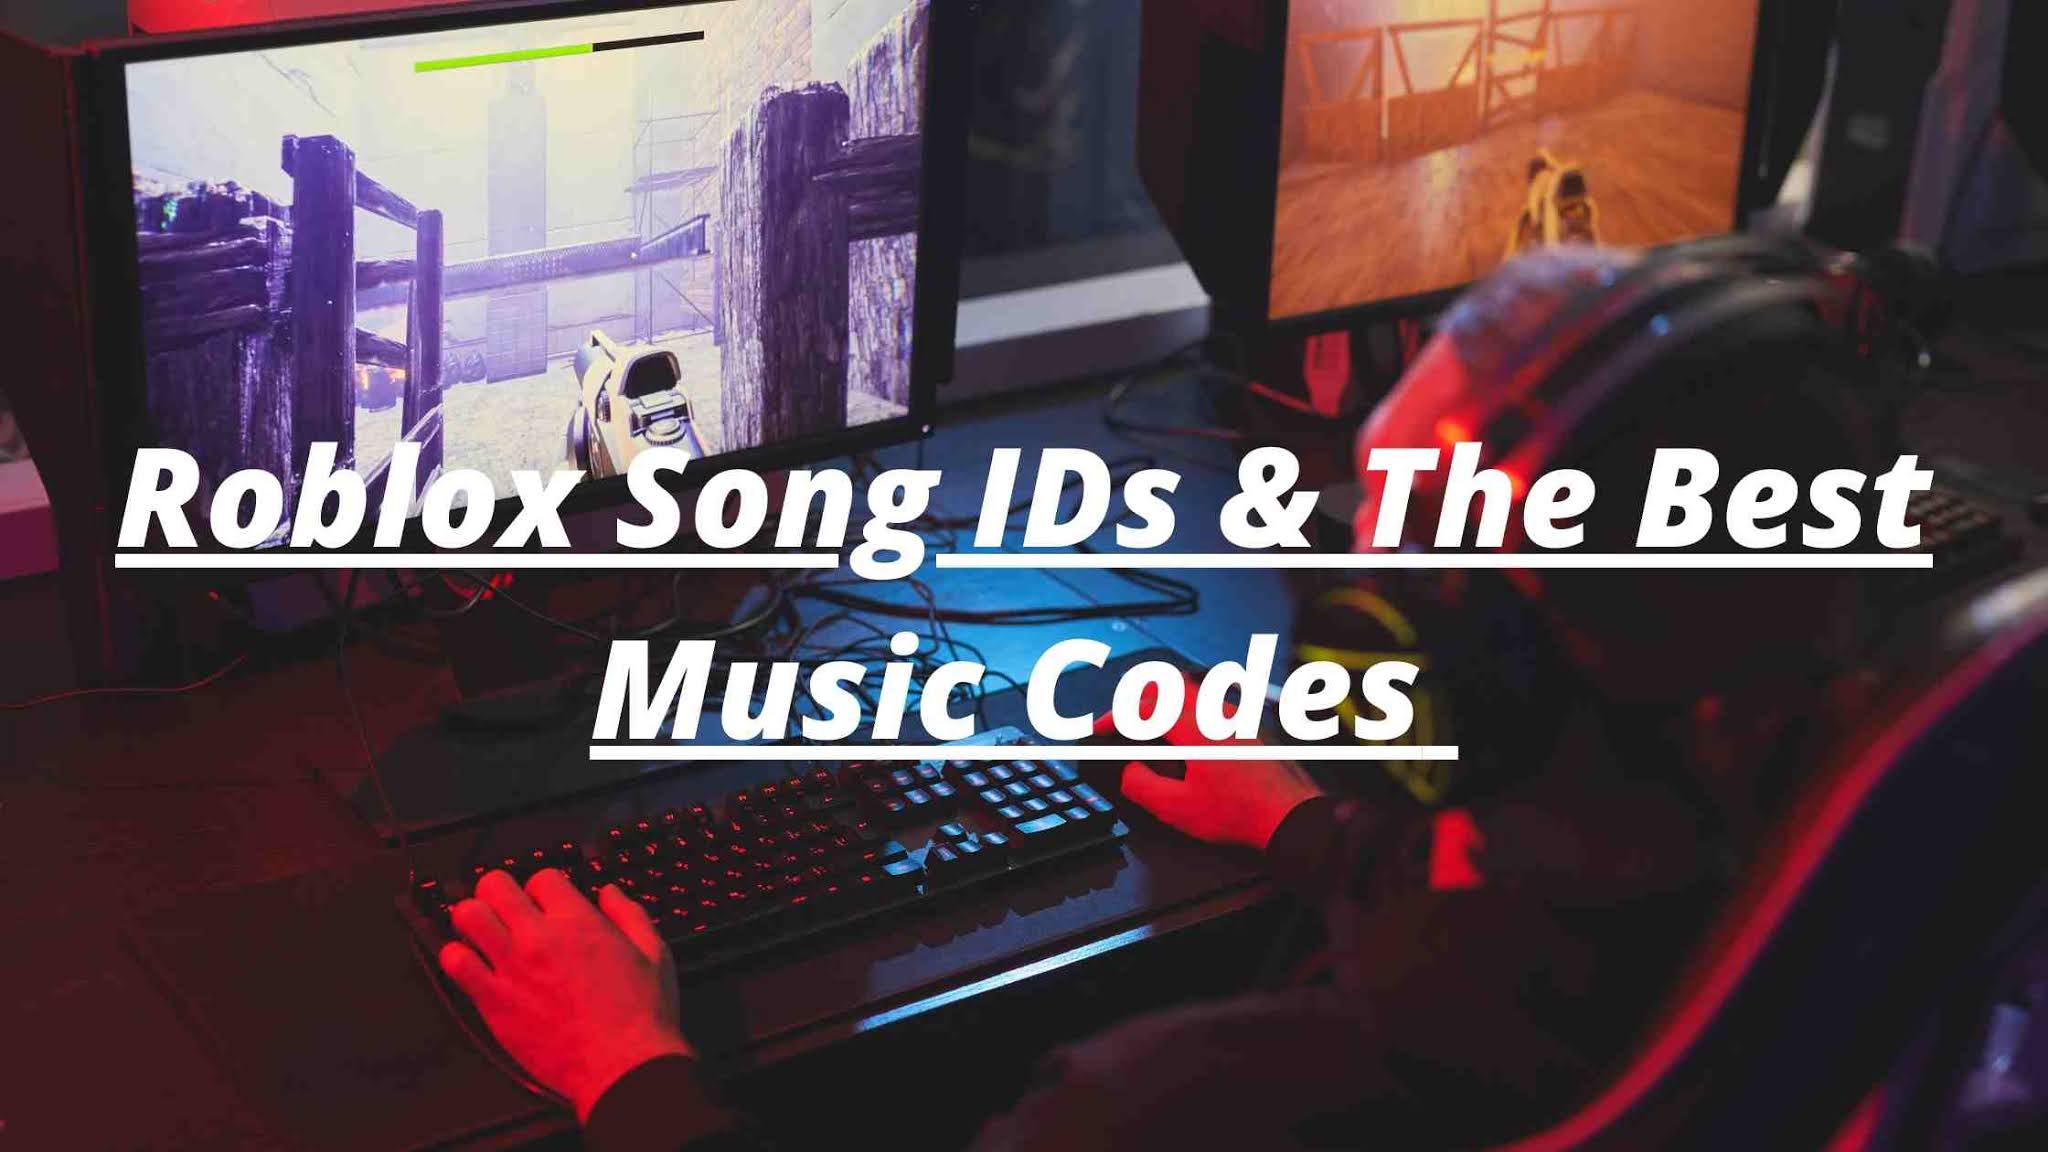 Roblox Song Ids The Best Music Codes - roblox sound id it's raining tacos